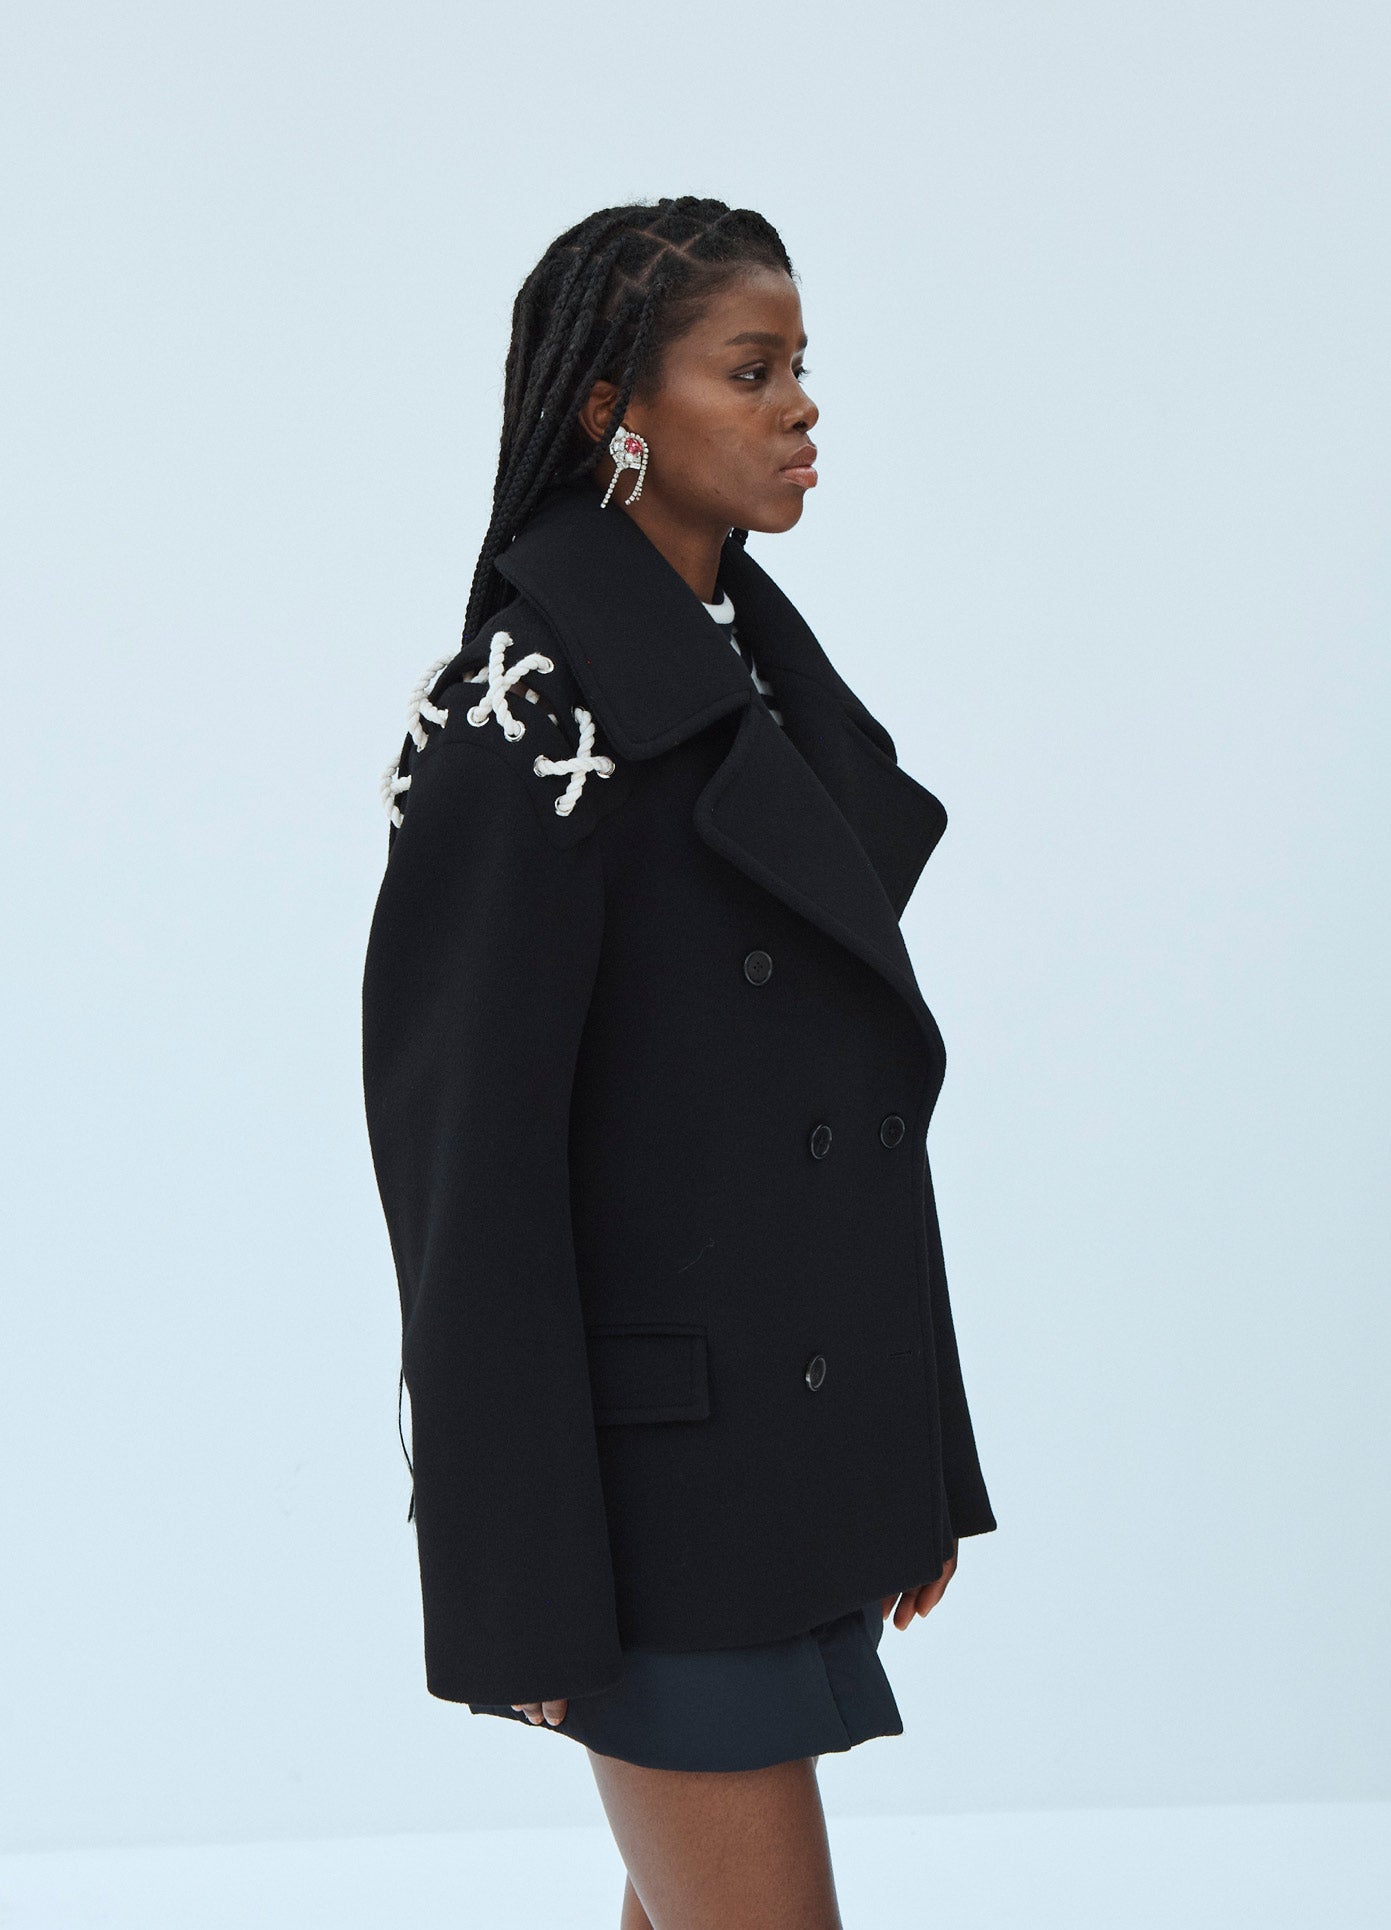 MONSE Double Faced Wool Peacoat in Black on Model Side View